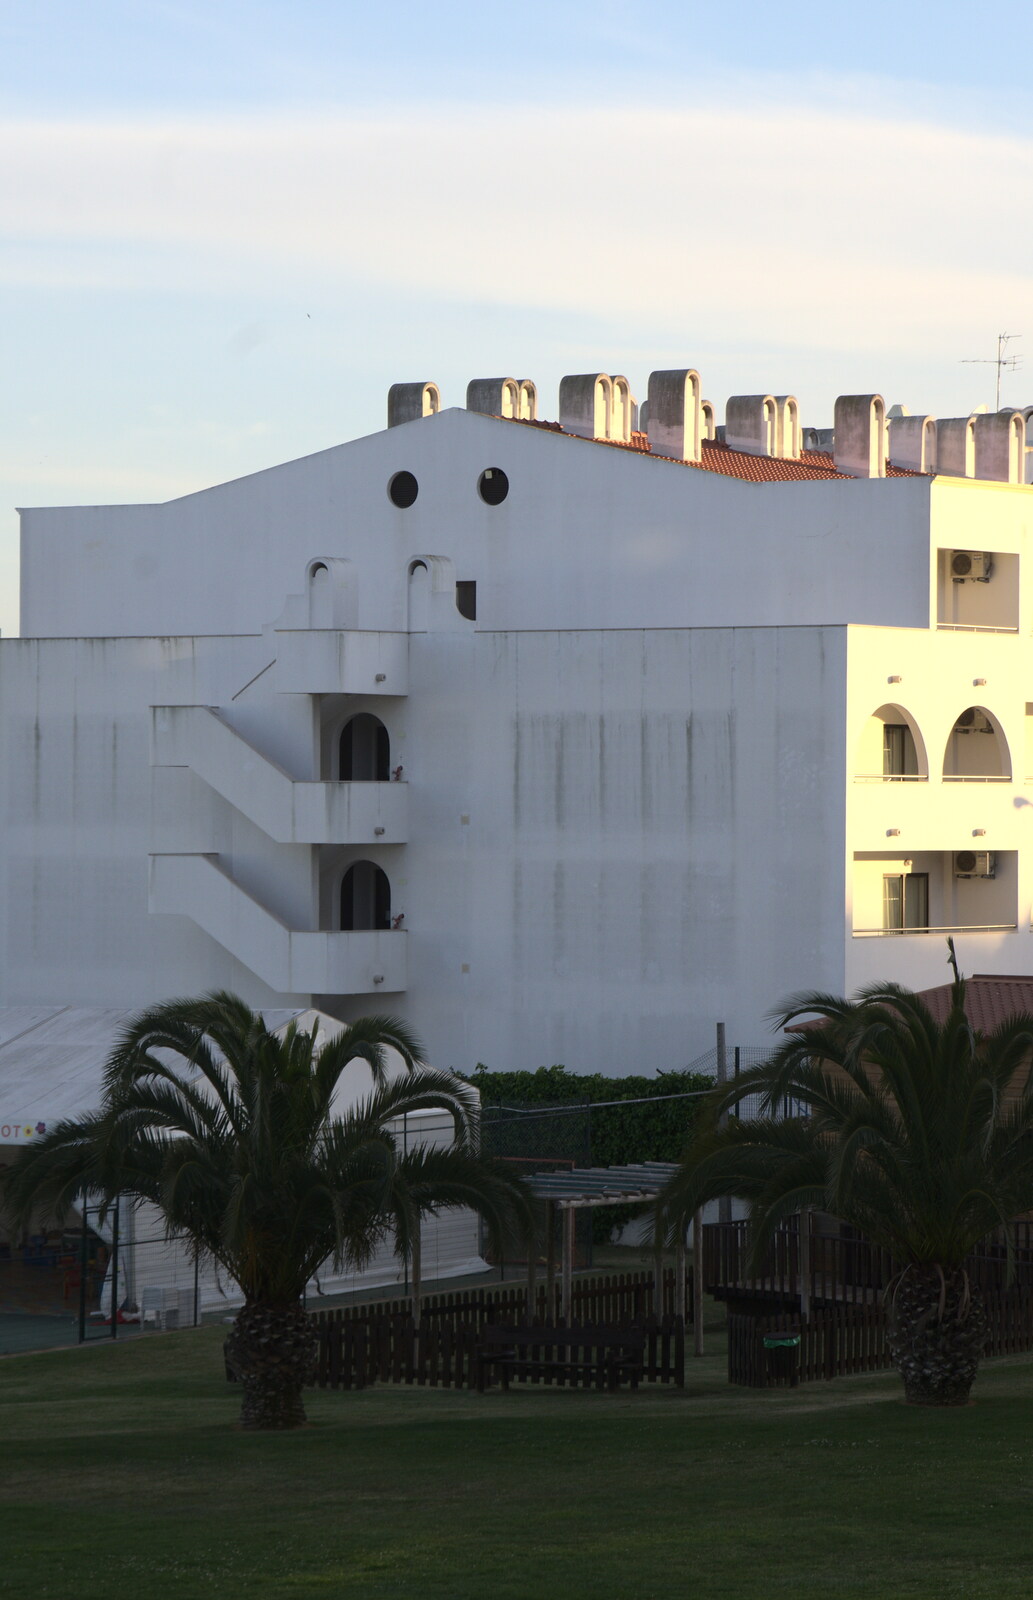 The top of the building looks like a Cyberman from Last Days and the Journey Home, Albufeira, Portugal - 9th April 2016